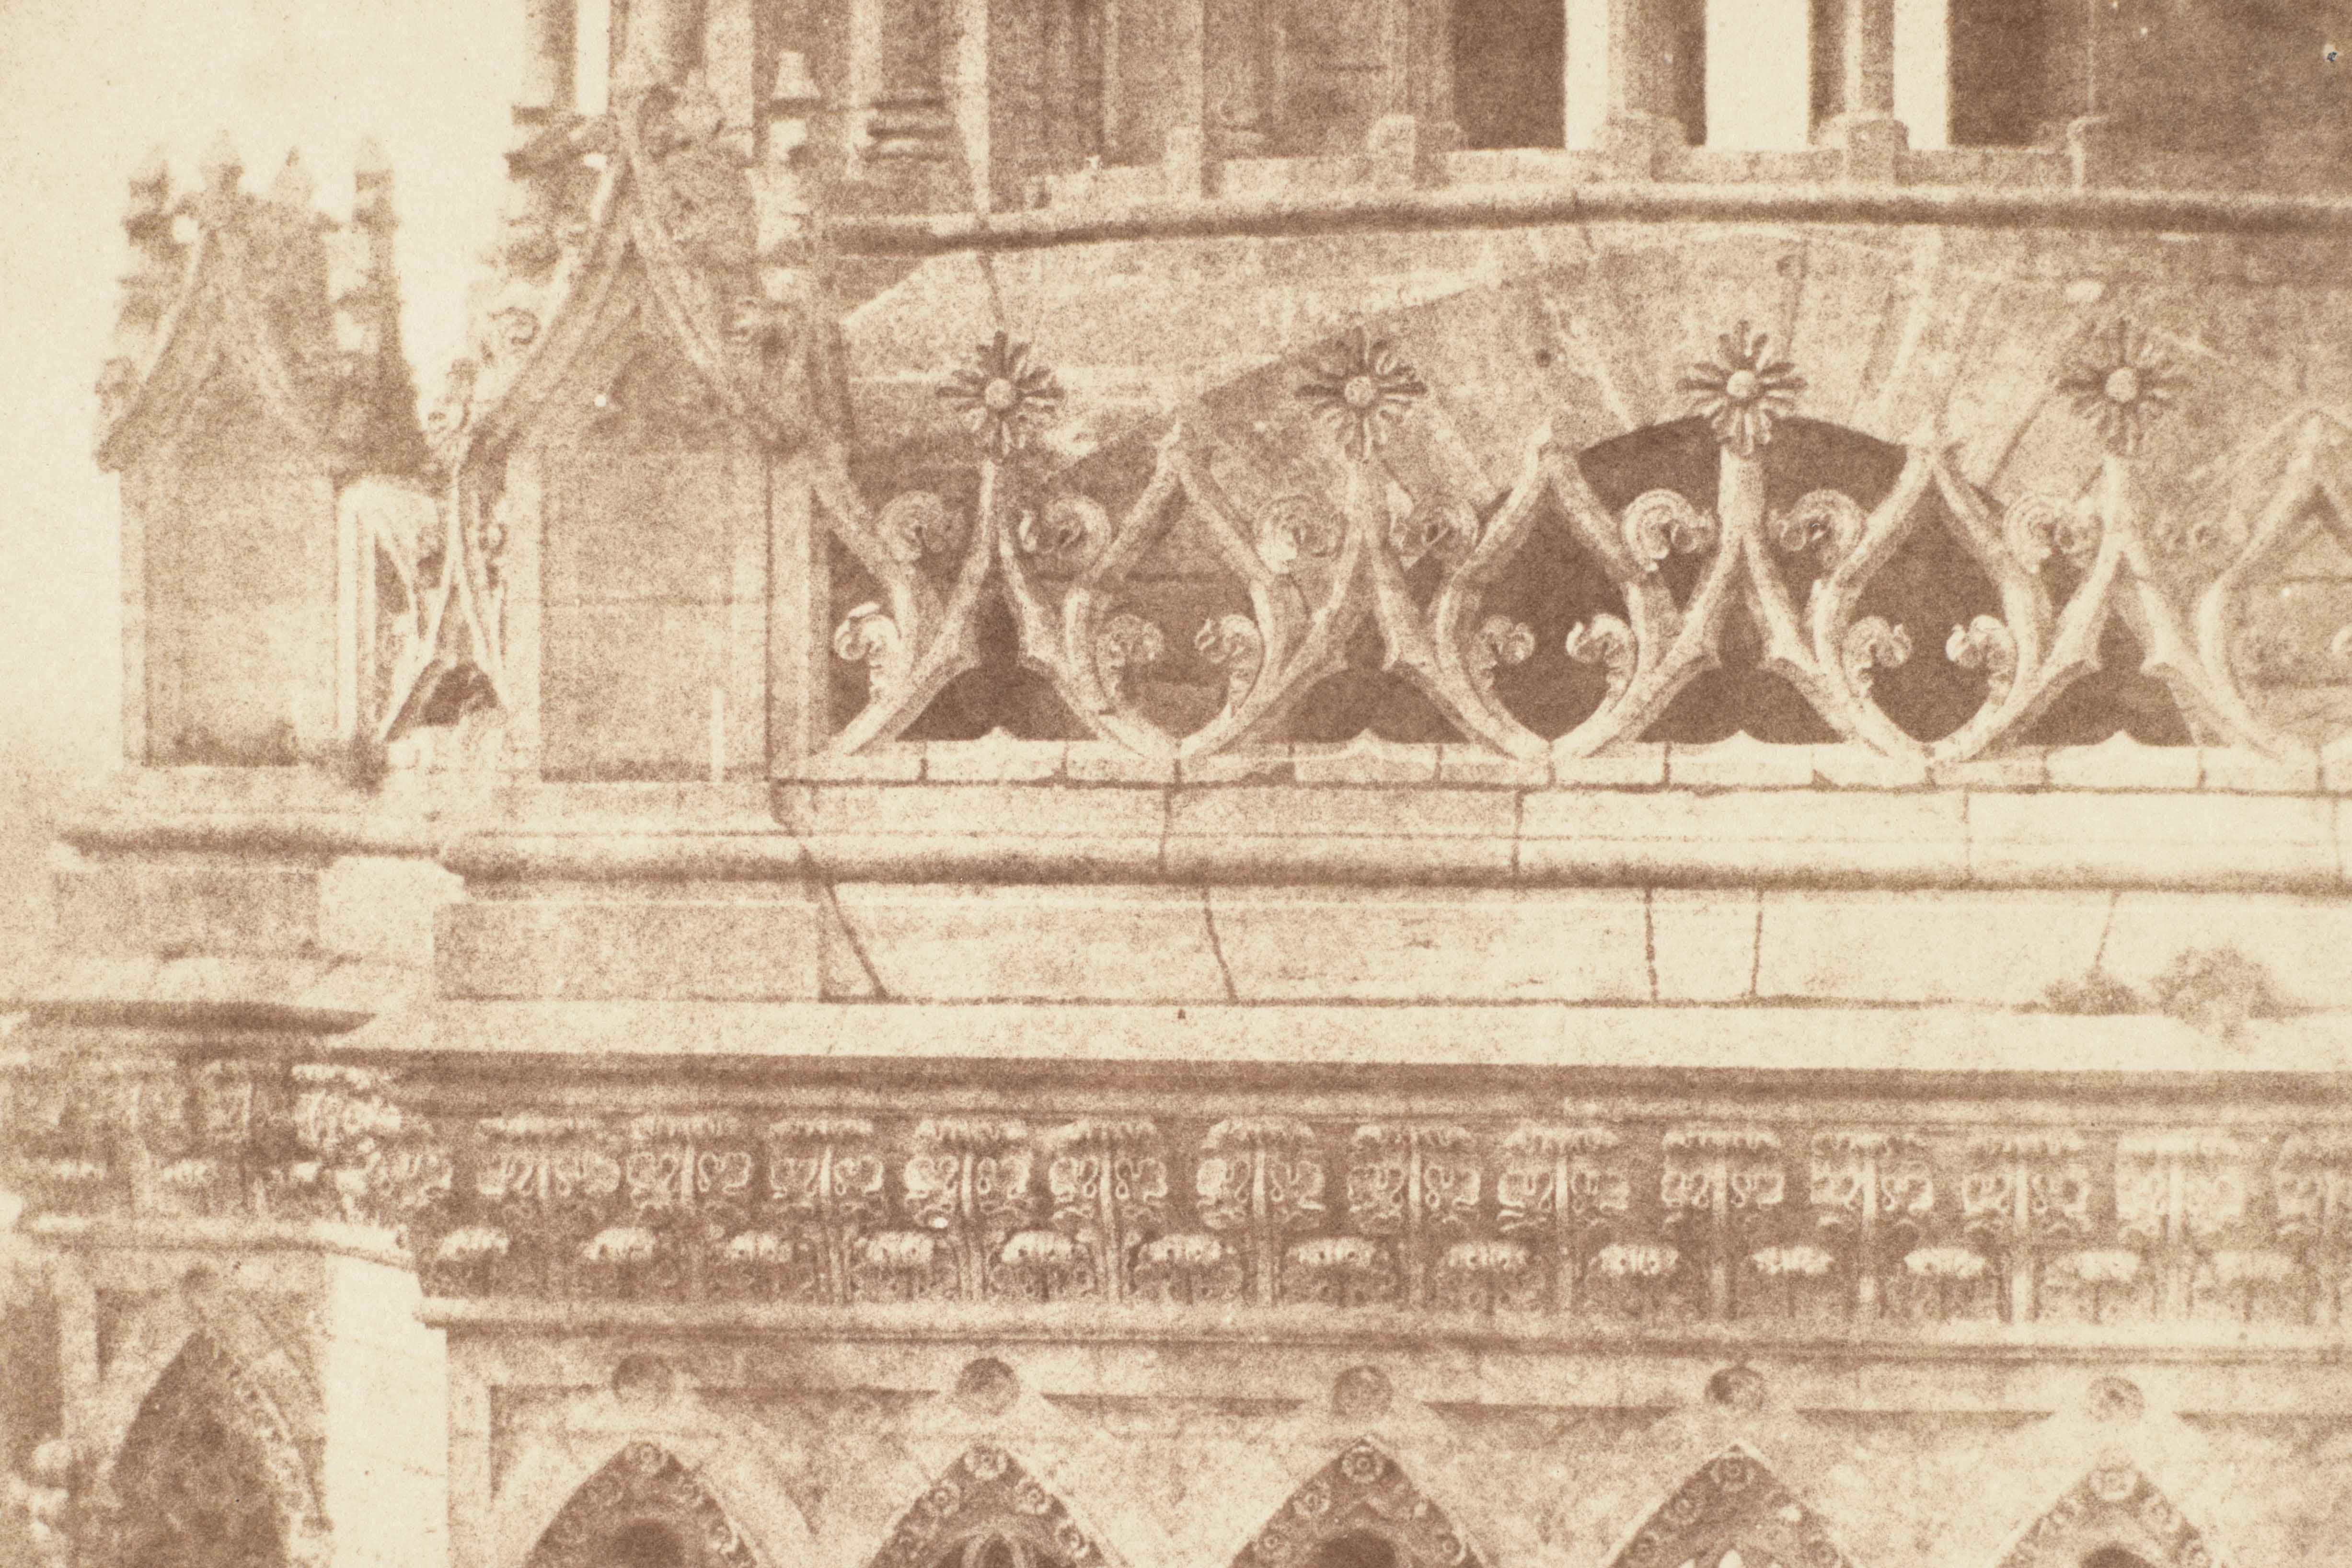 William Henry Fox Talbot (British, 1800–1877), Orléans Cathedral, detail, 1843, calotype. Bank of America Collection